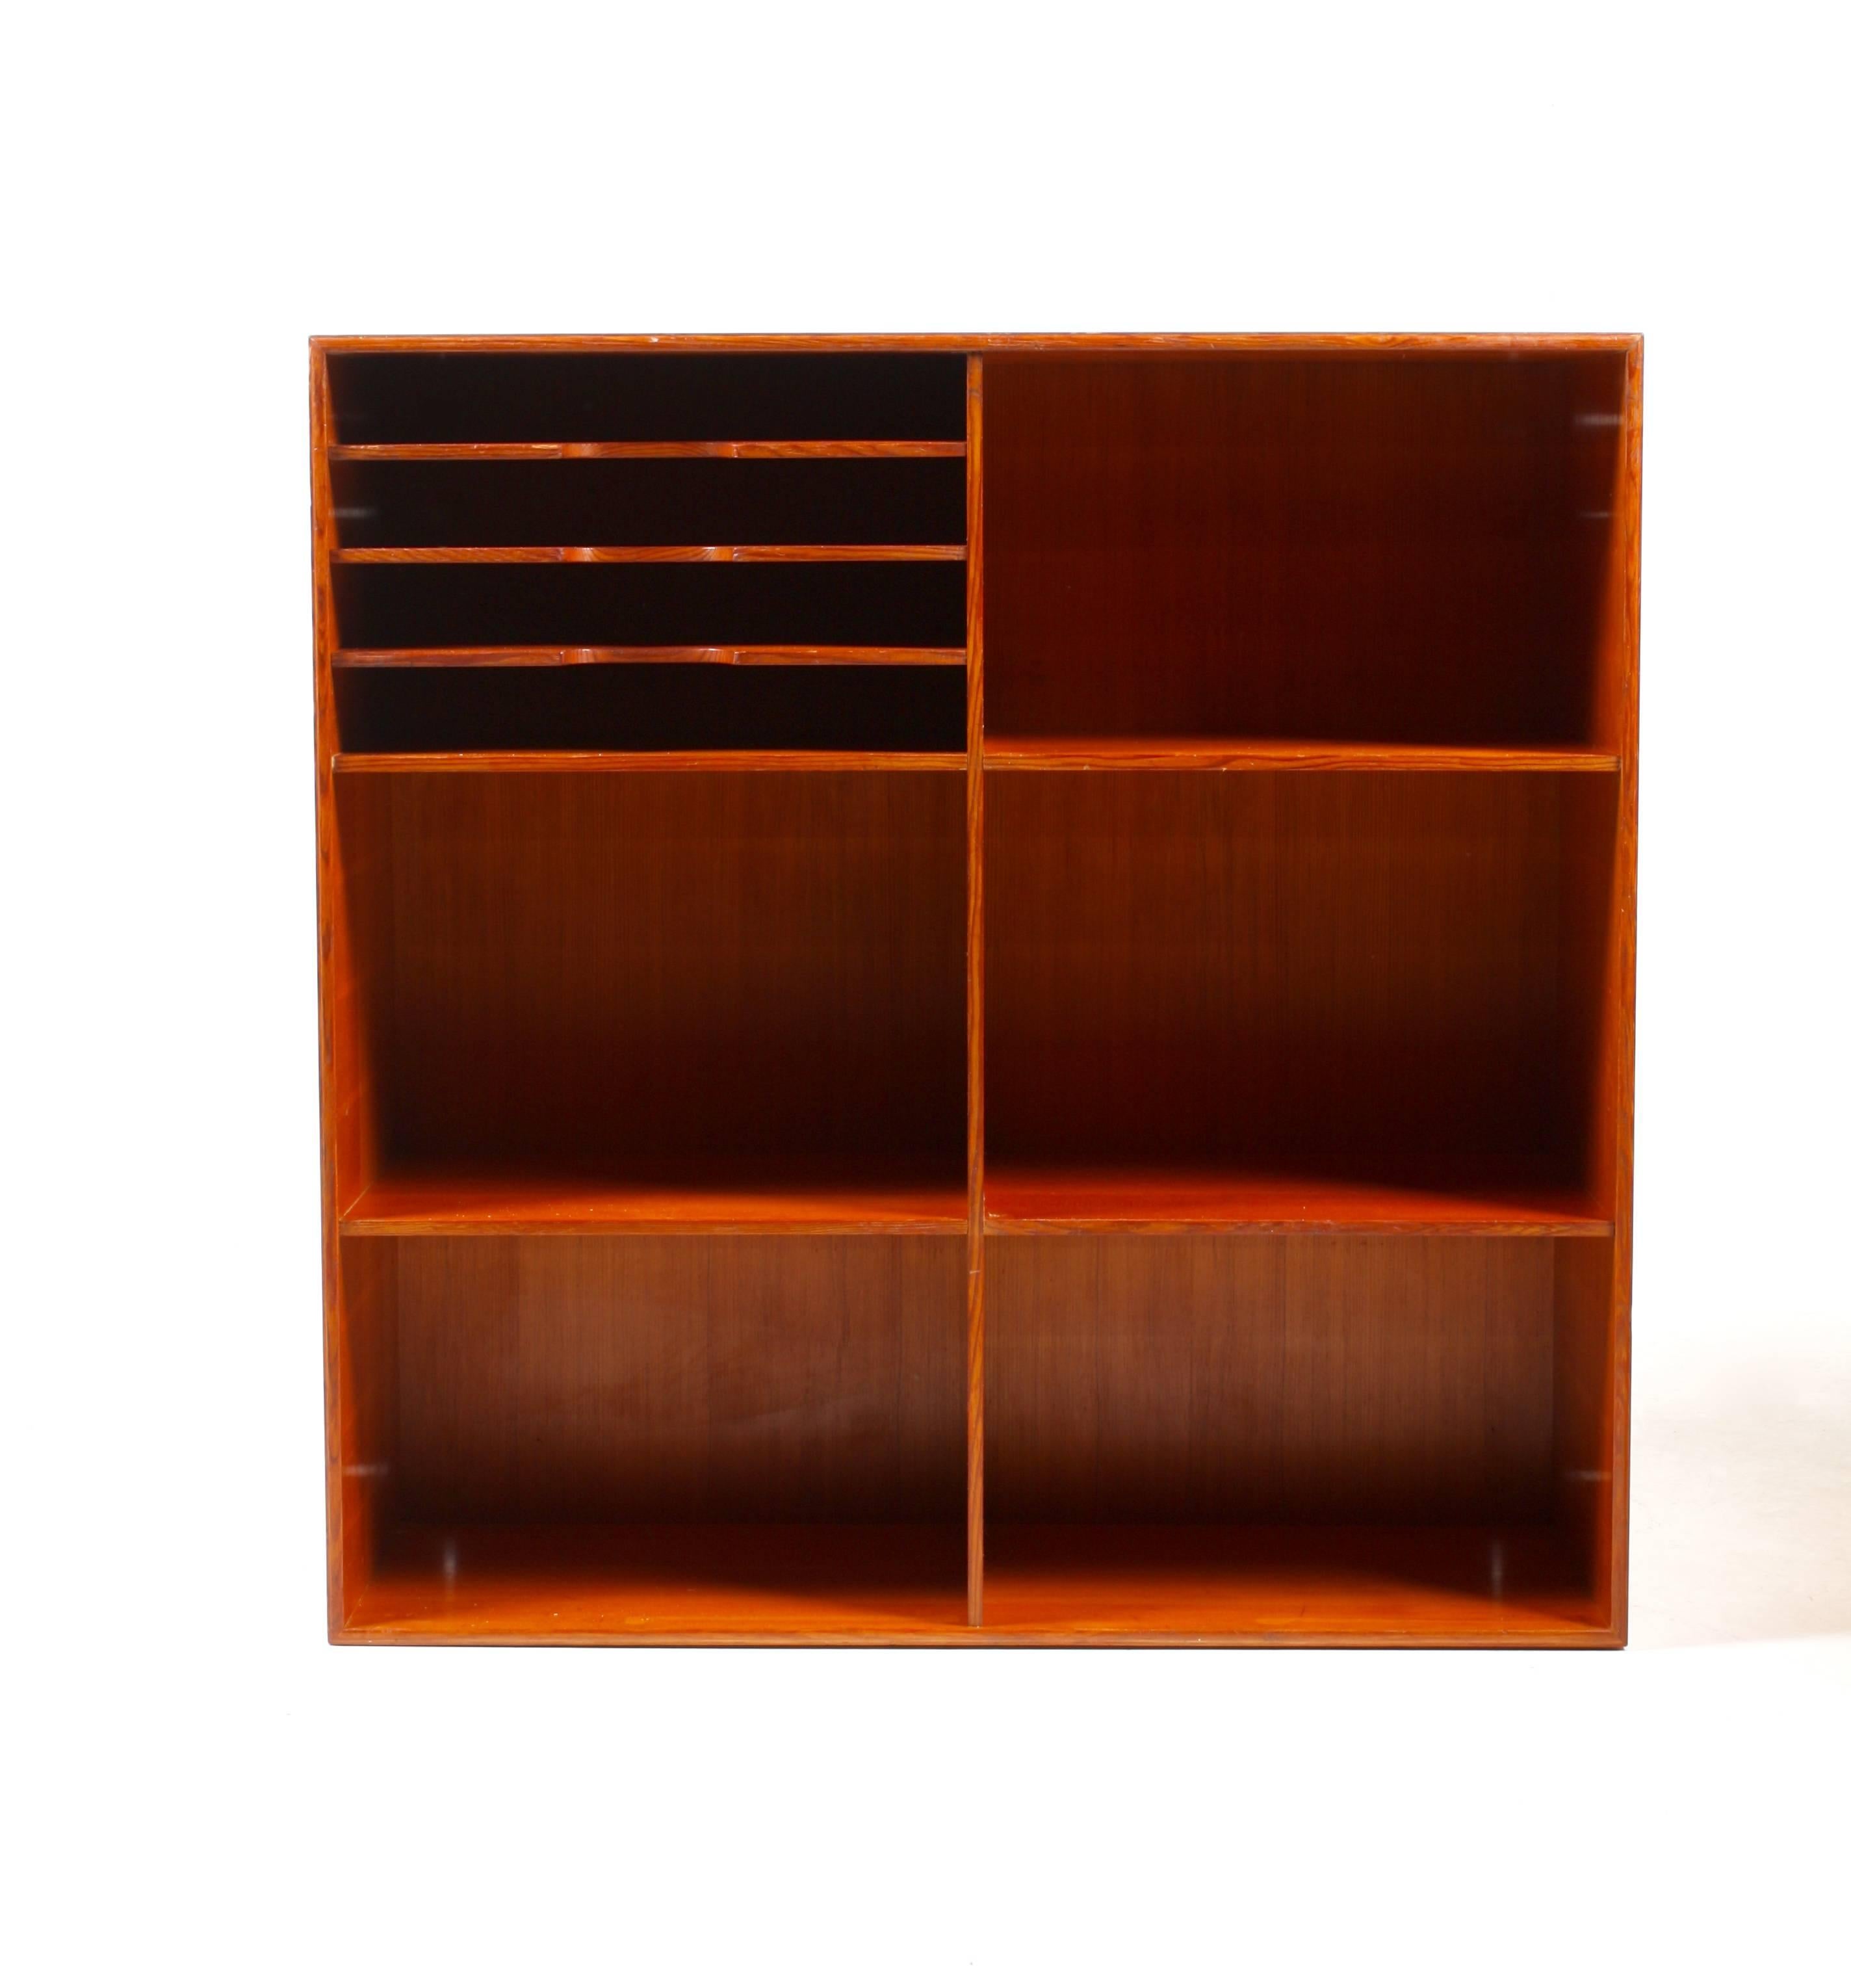 Bookcase in Oregon pine designed by Mogens Koch for Rud. Rasmussen cabinetmakers in 1933. Made in Denmark and in all original condition.